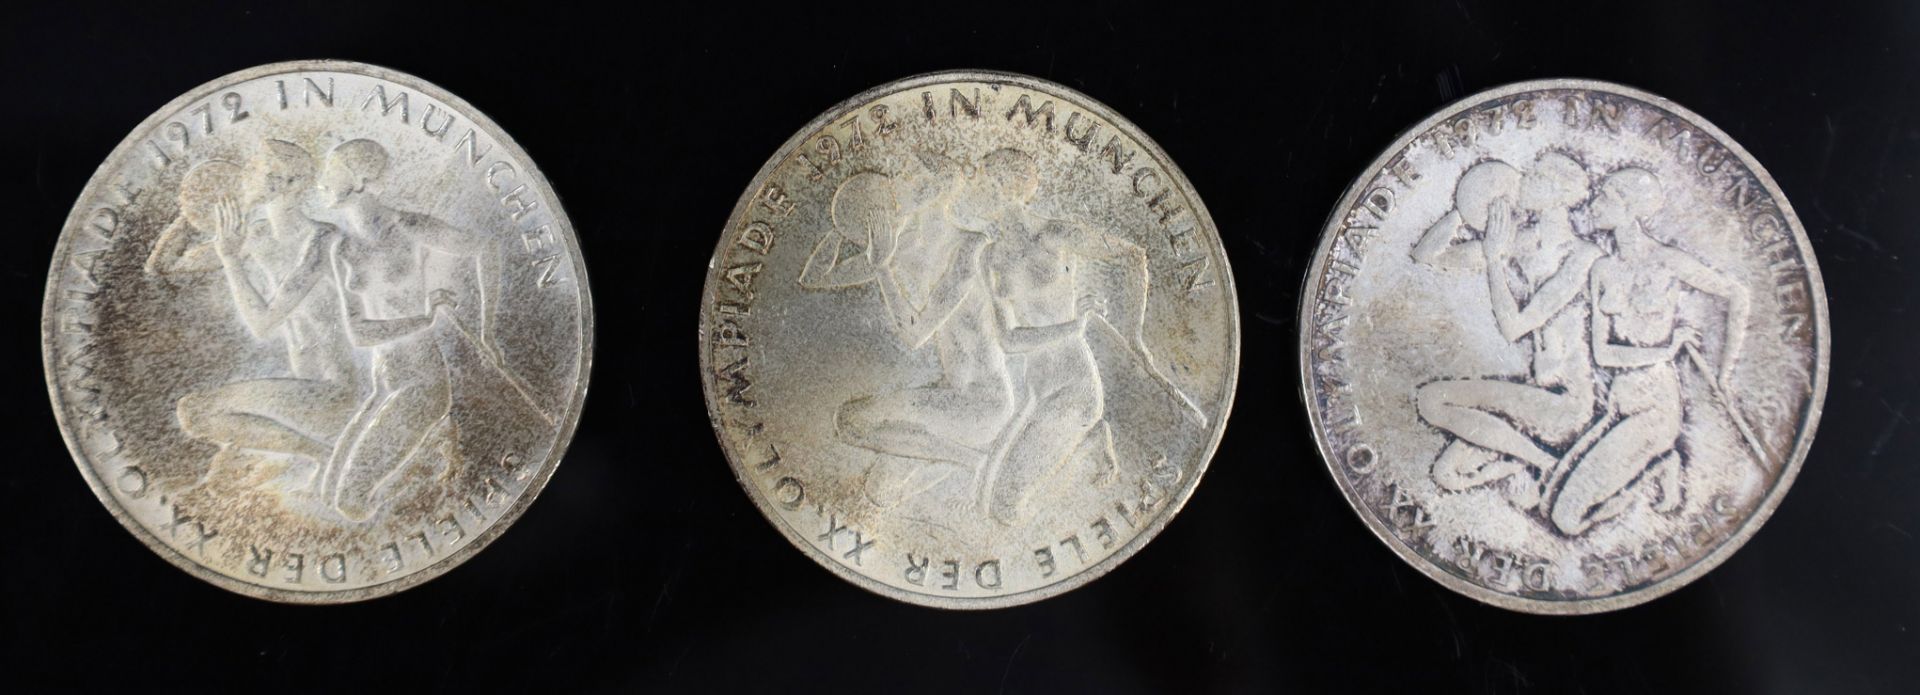 9x ‘10 German Marks’. Munich Olympics. Silver coins. - Image 6 of 7